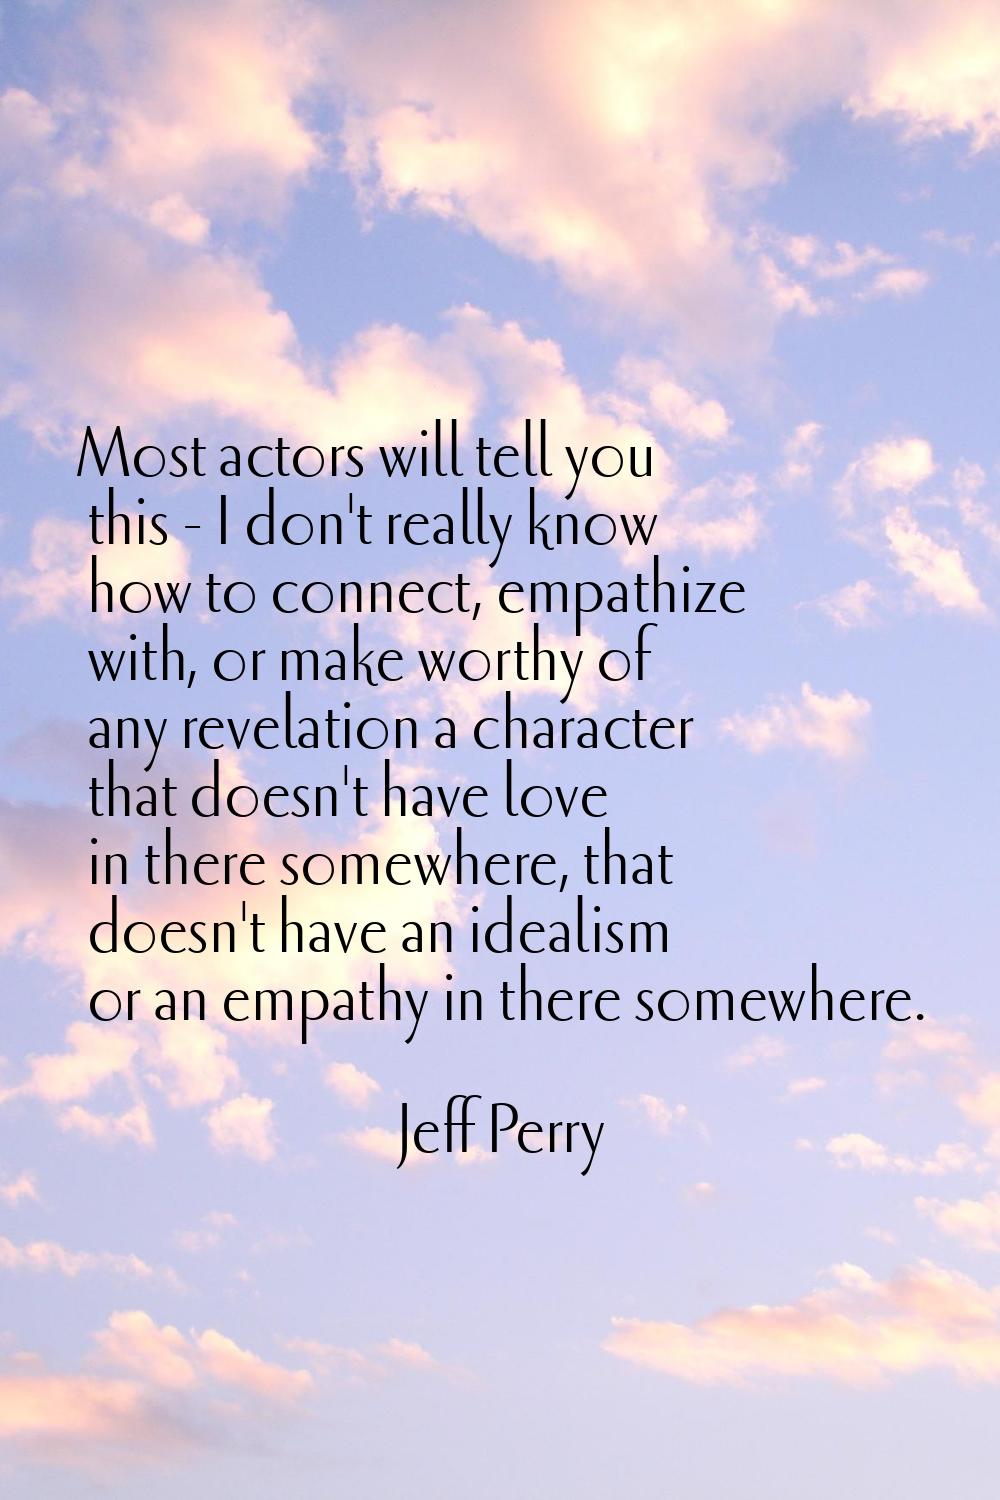 Most actors will tell you this - I don't really know how to connect, empathize with, or make worthy